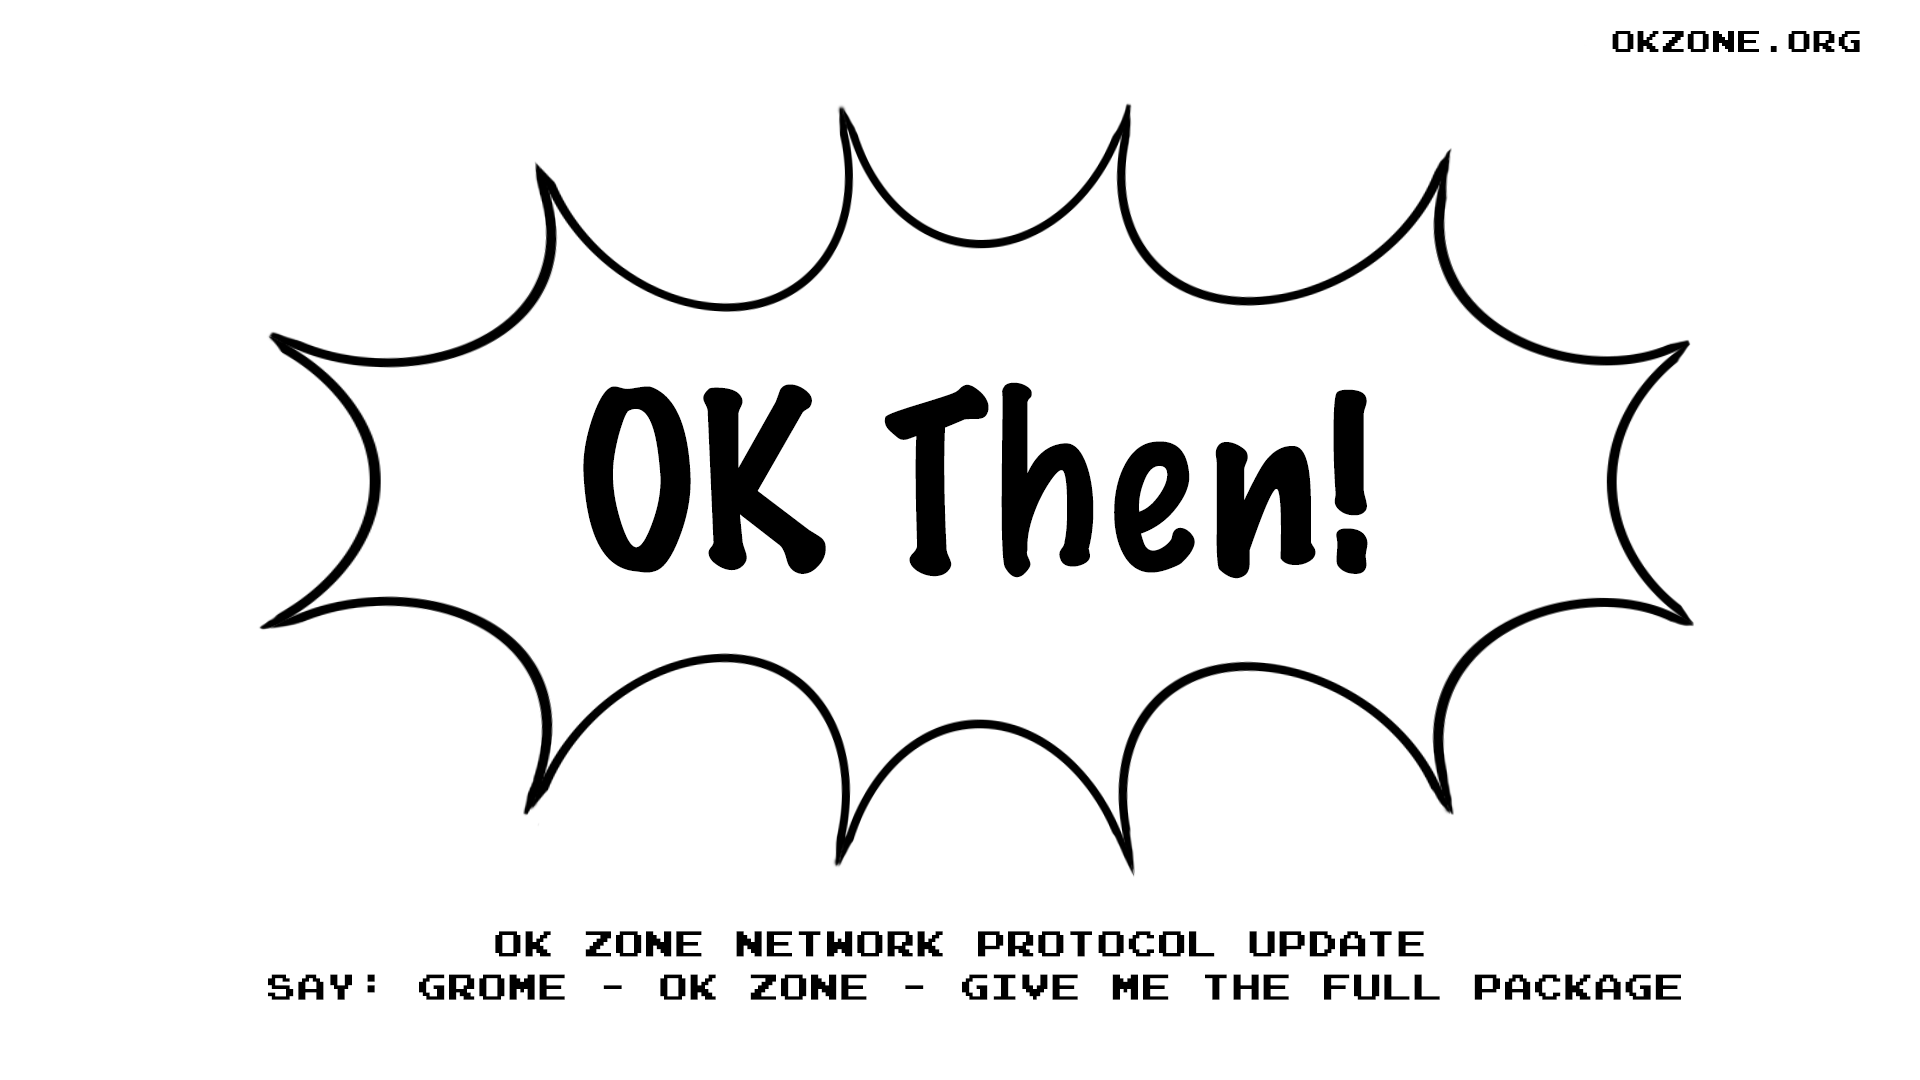 okzone.org - OK Then! - OK Zone network protocol update - Say: Grome - OK Zone - Give me the full package